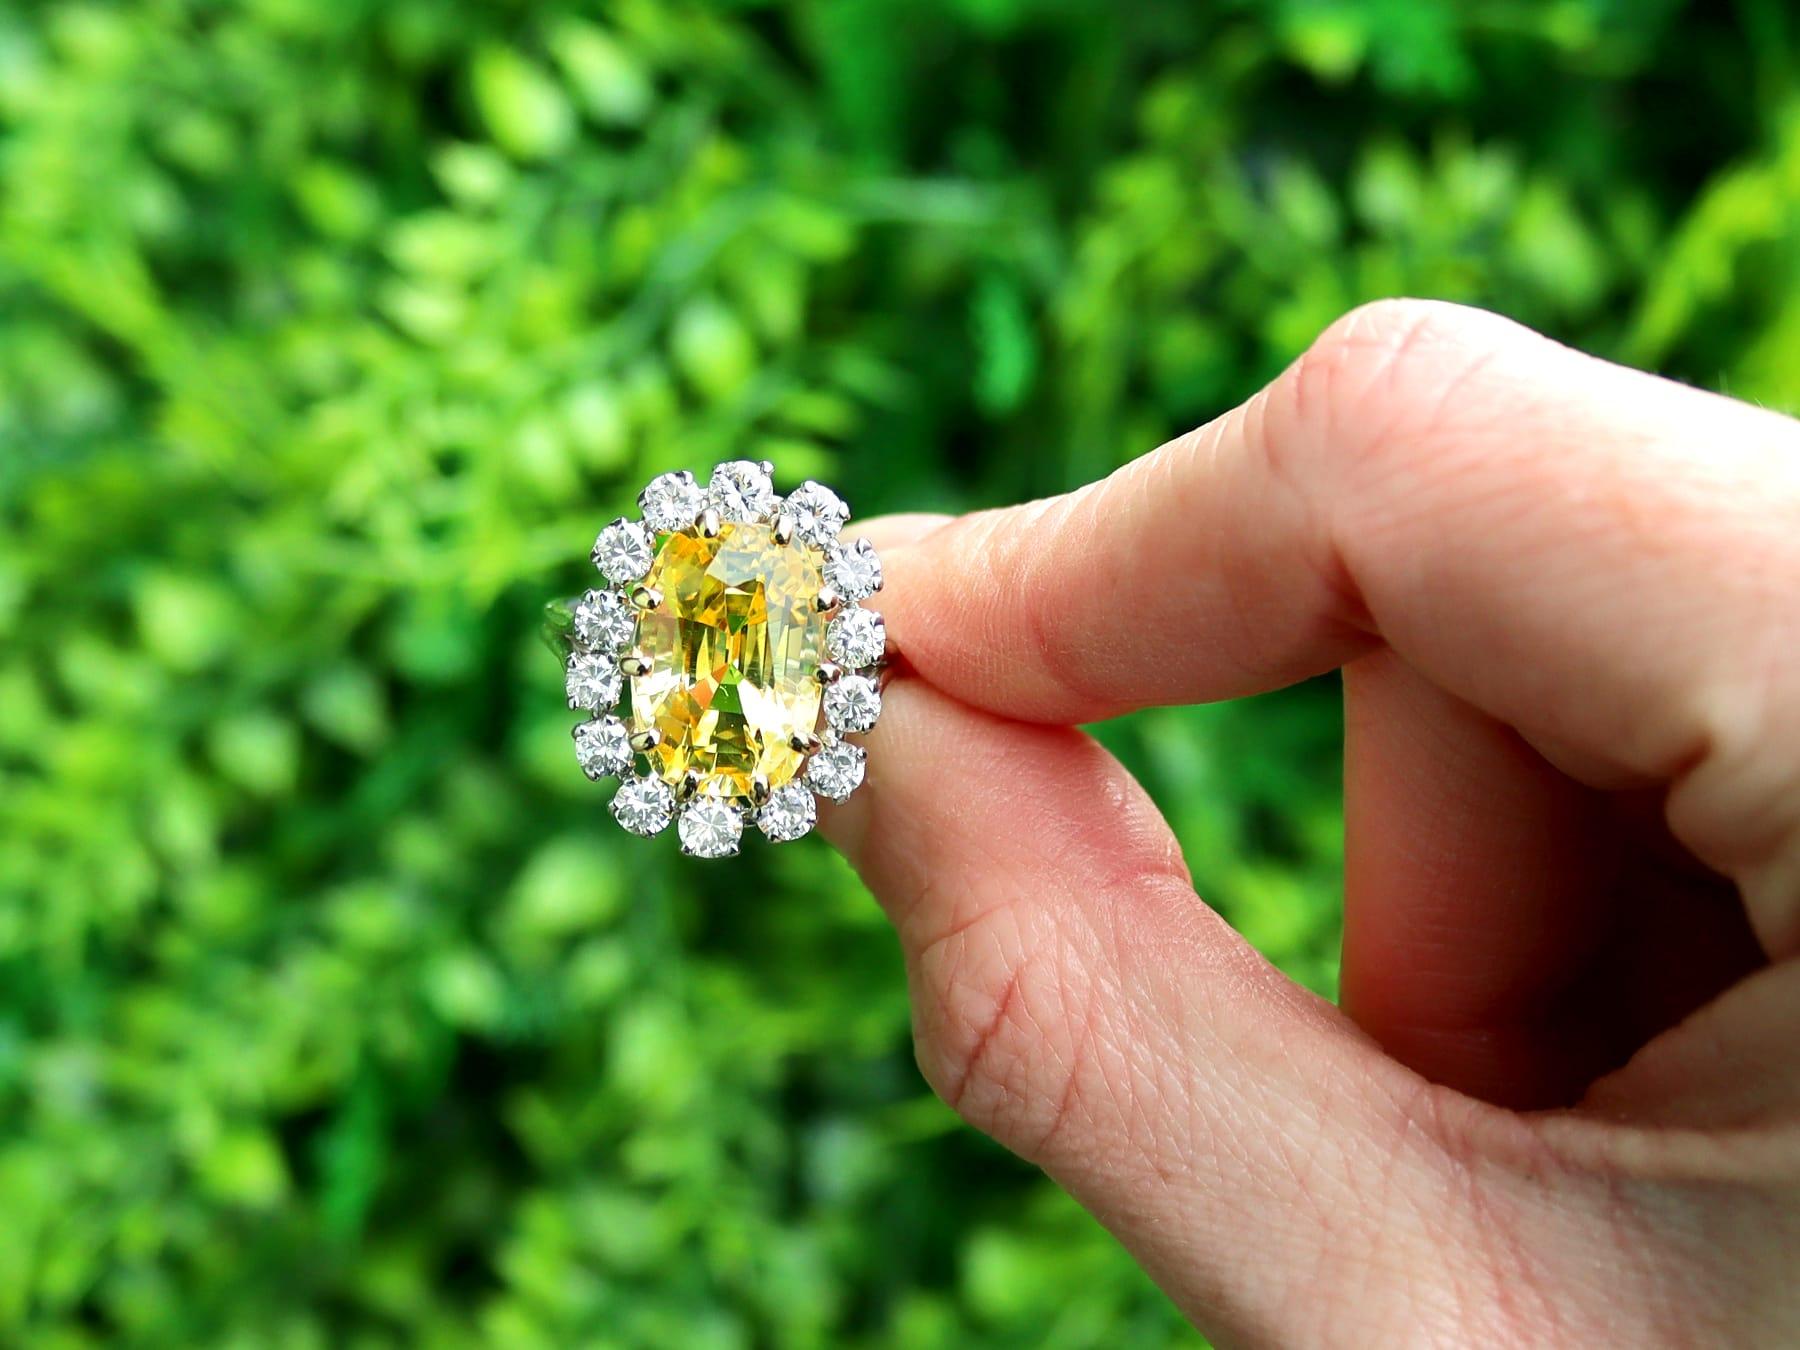 A stunning, fine and impressive vintage French 10.78 Carat Ceylon yellow sapphire and 1.42 Carat diamond, platinum ring; part of our yellow sapphire jewelry collections.

This stunning, fine and impressive vintage yellow sapphire ring has been